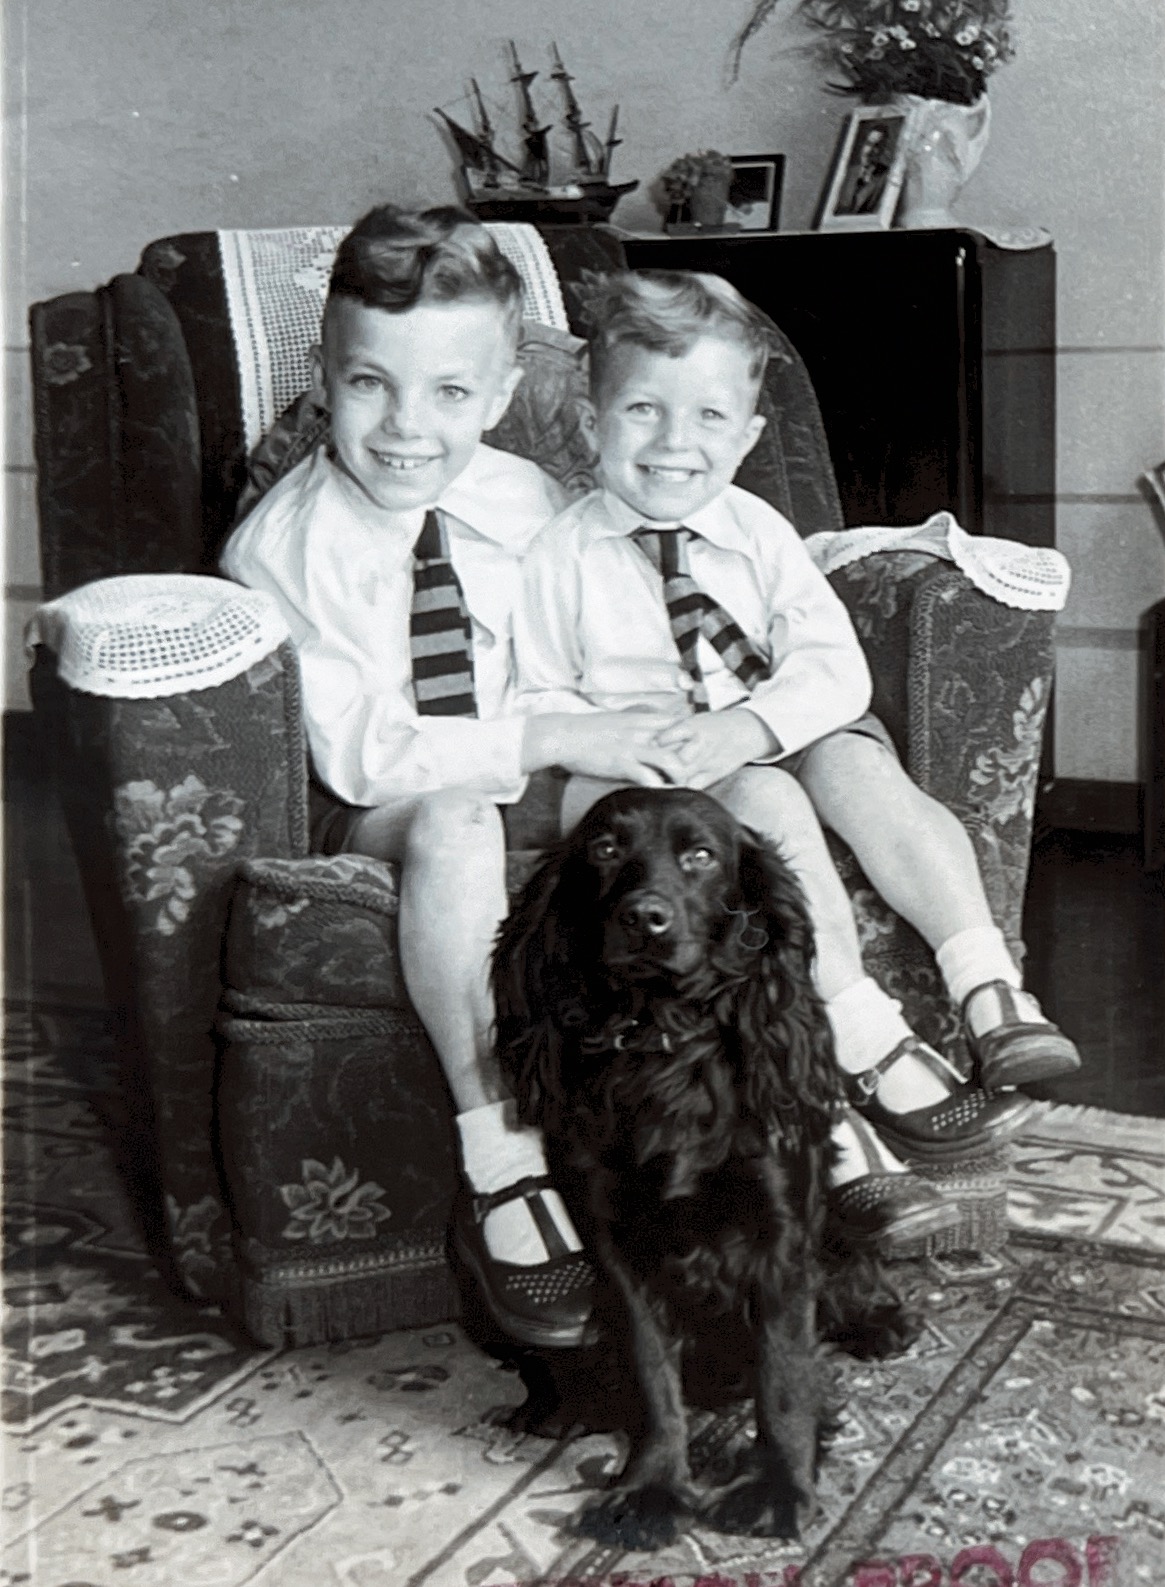 Us with ‘Bandy Bow’ our beloved dog (about 1952/3) Richard & Philip Harrison. 